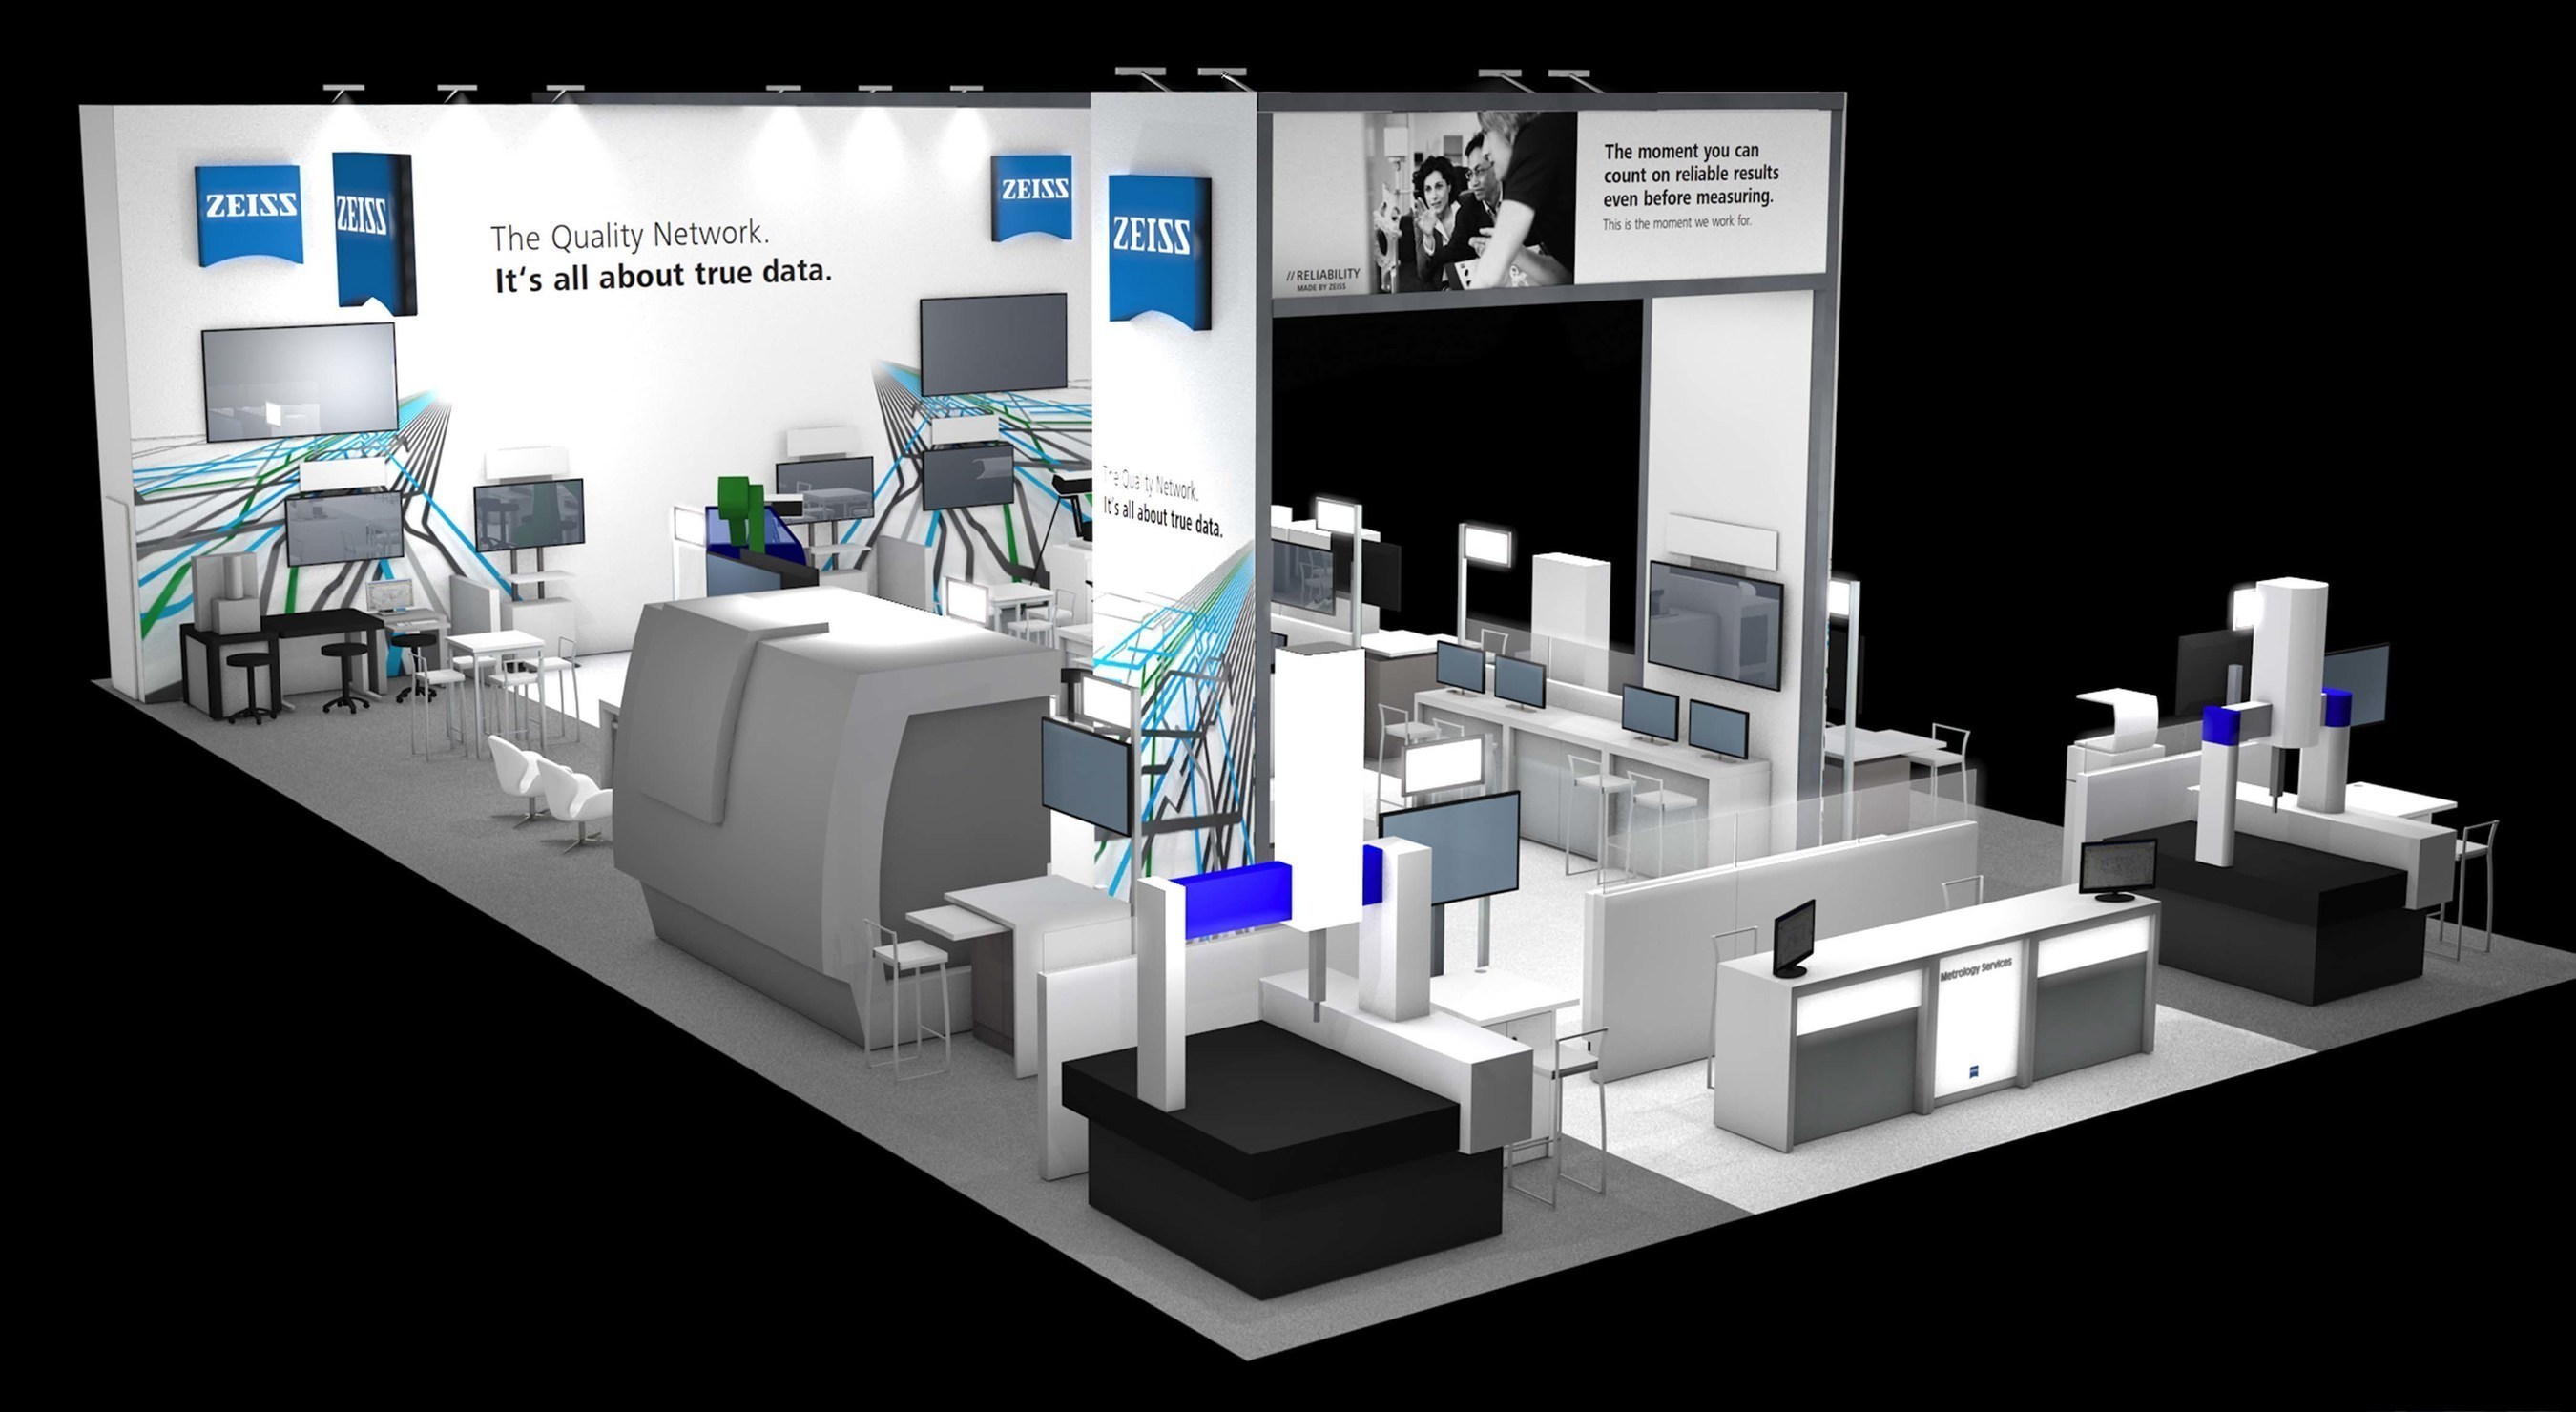 ZEISS showcases quality networking at IMTS 2016